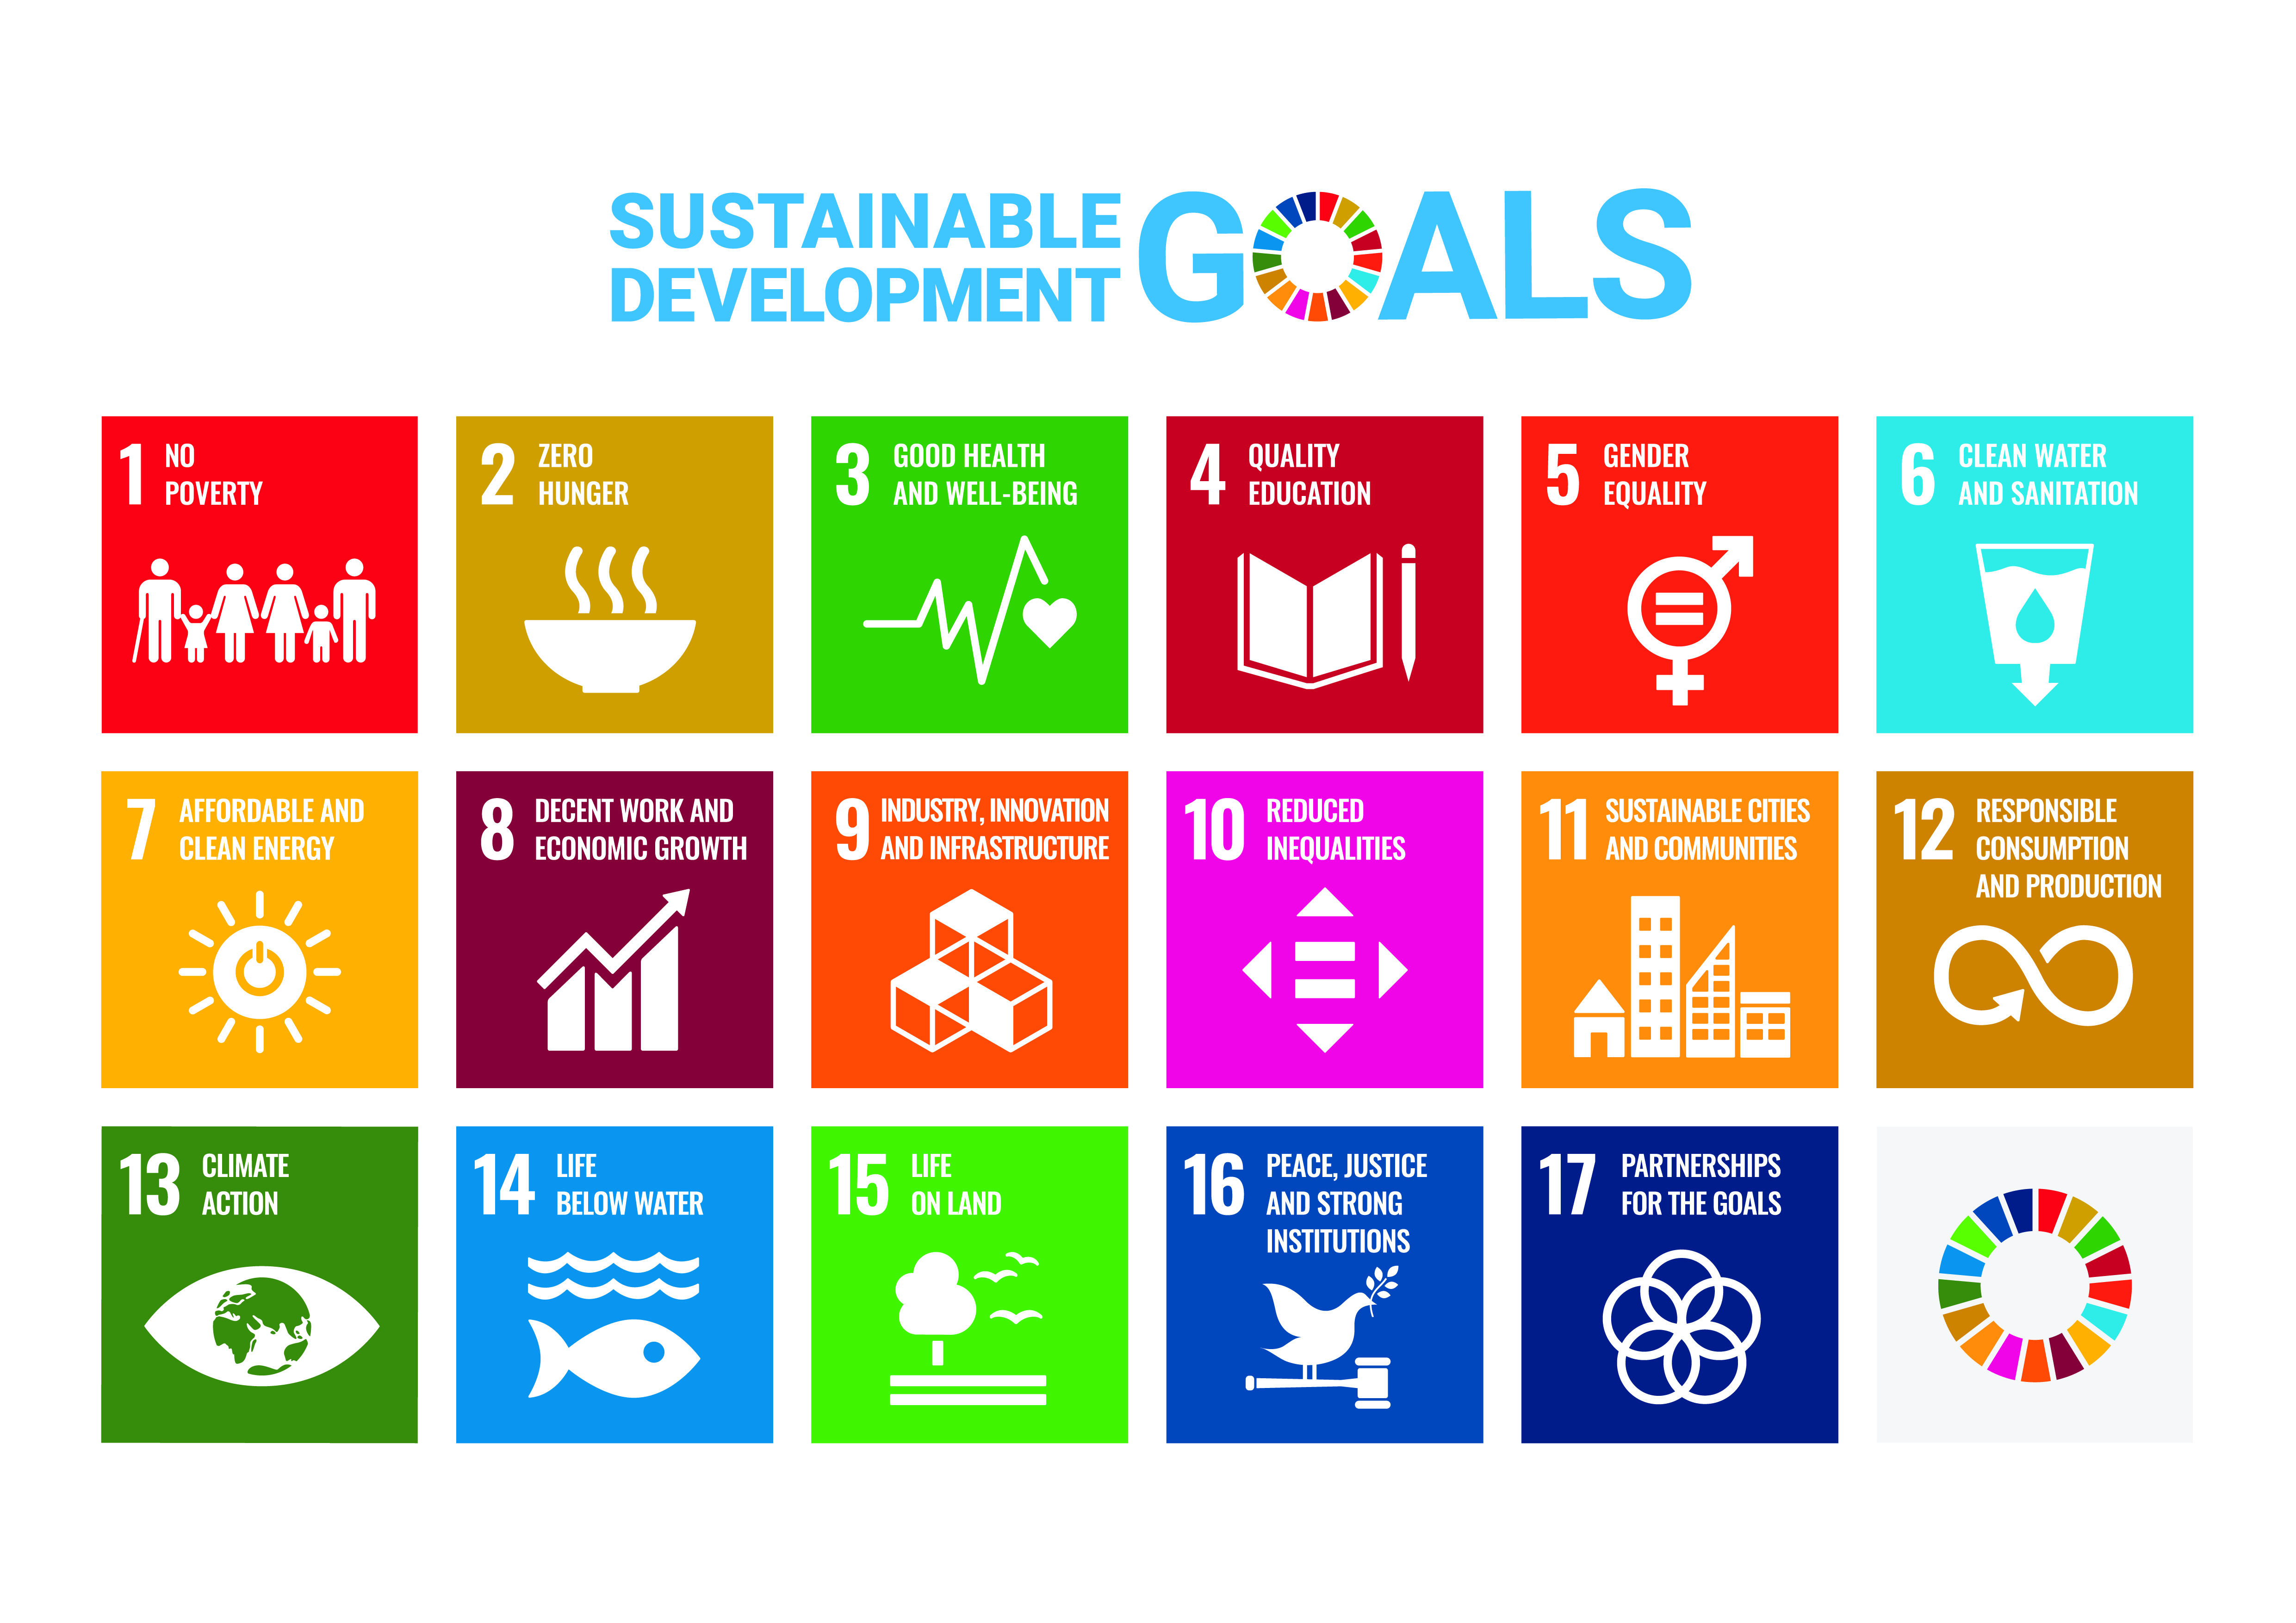 Collective image of the logos for all the sustainable development goals.